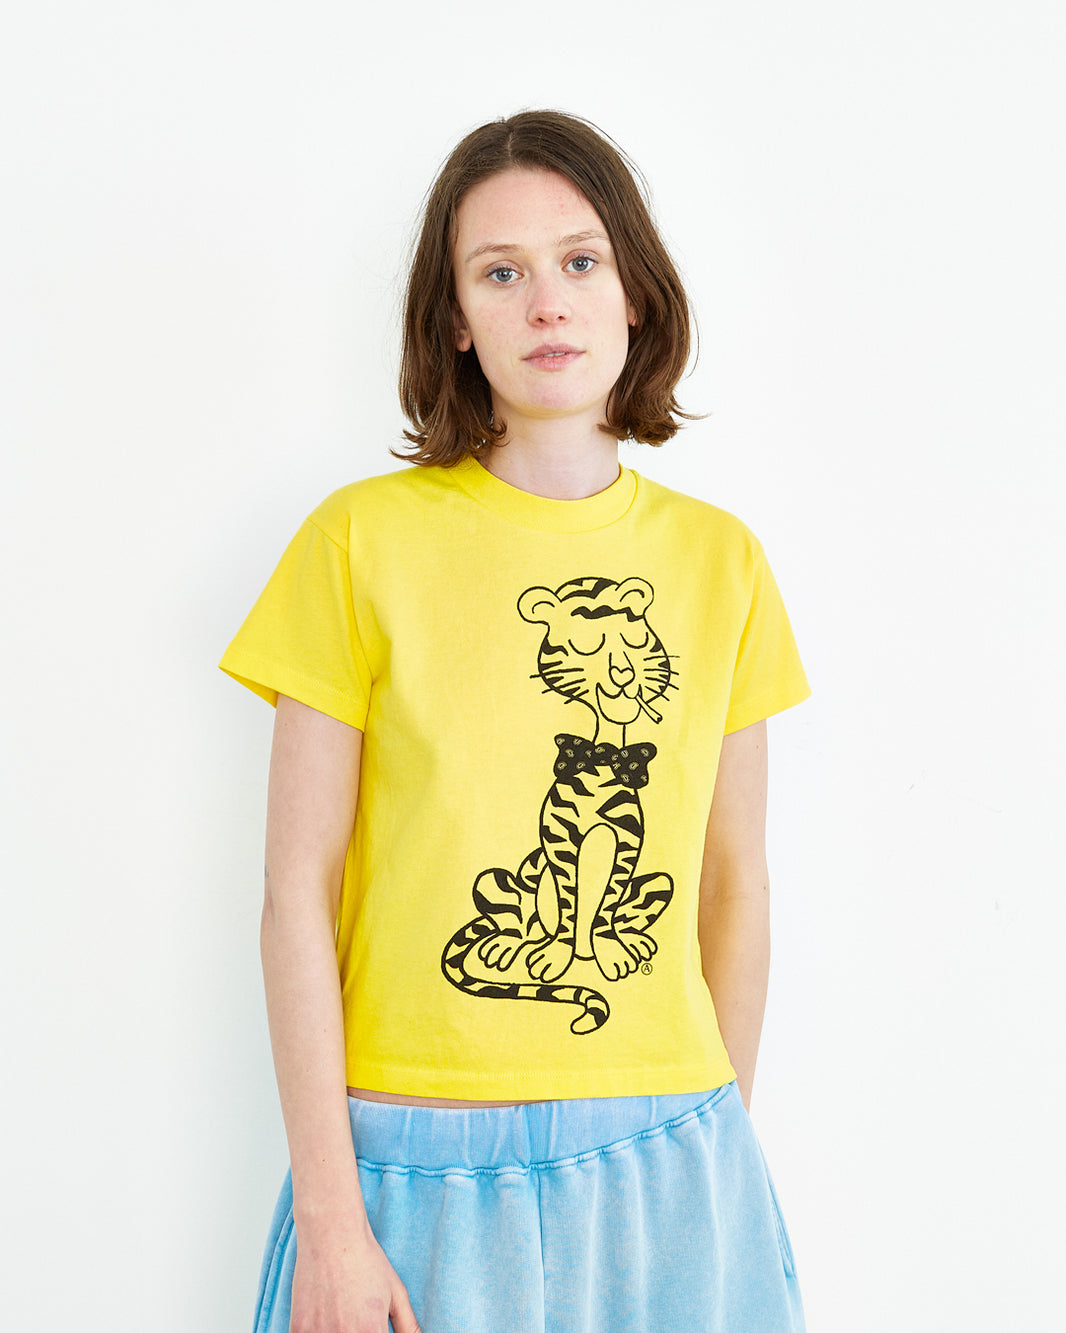 Smoking Tiger Shortsleeve Baby Tee in Yellow from Aries Arise Spring / Summer 2024 collection blues store www.bluesstore.co